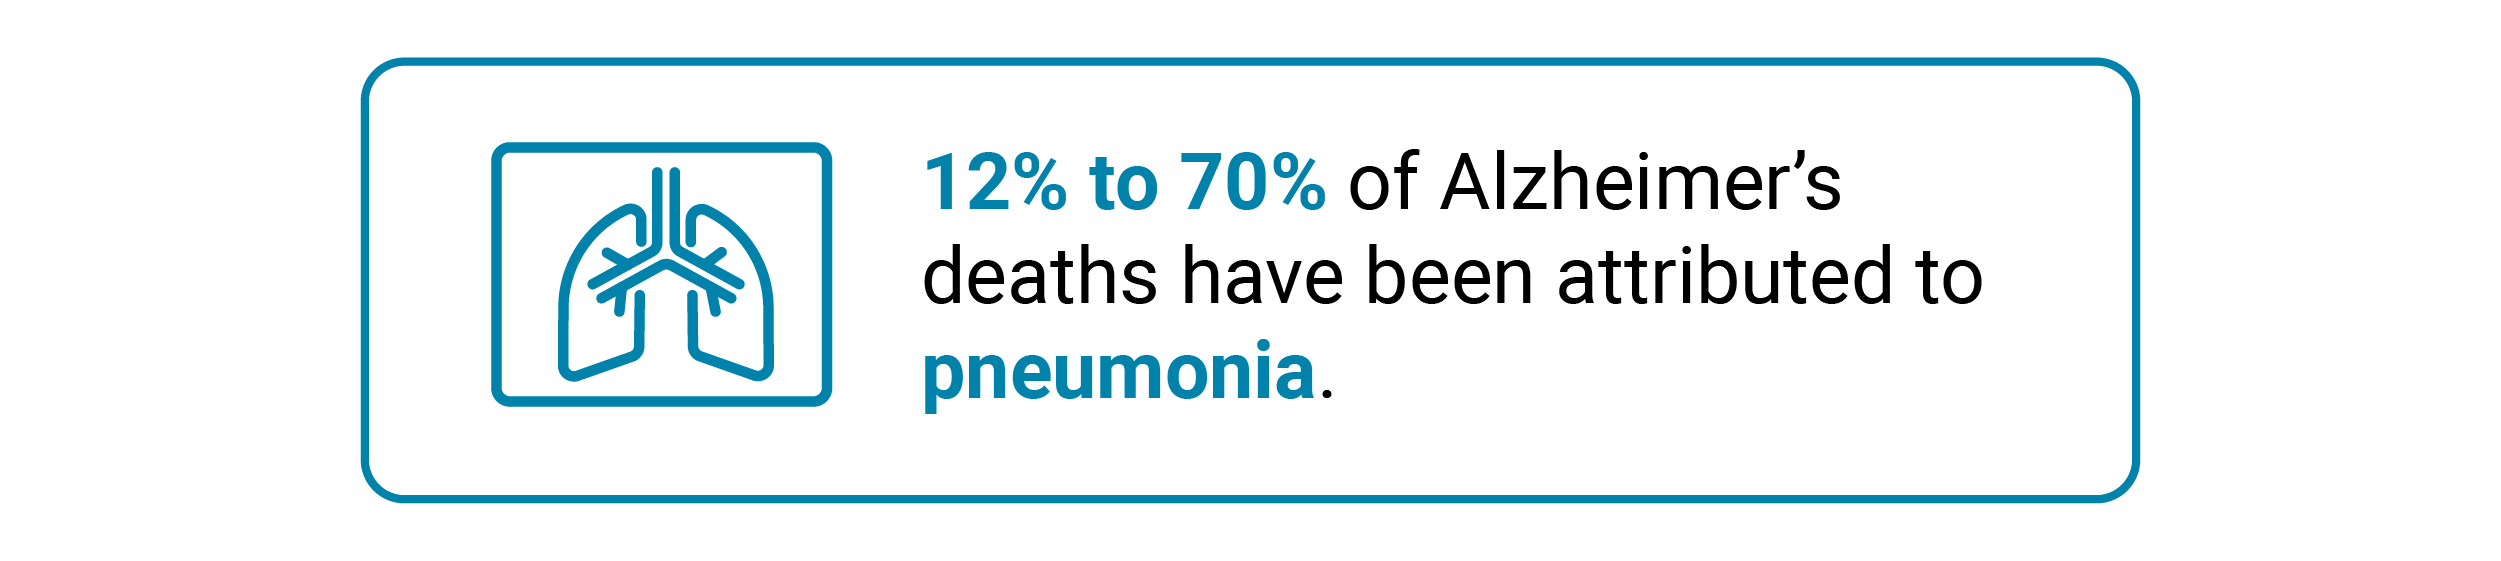 Call out text box saying pneumonia caused 12% to 70% of all Alzheimer’s deaths.